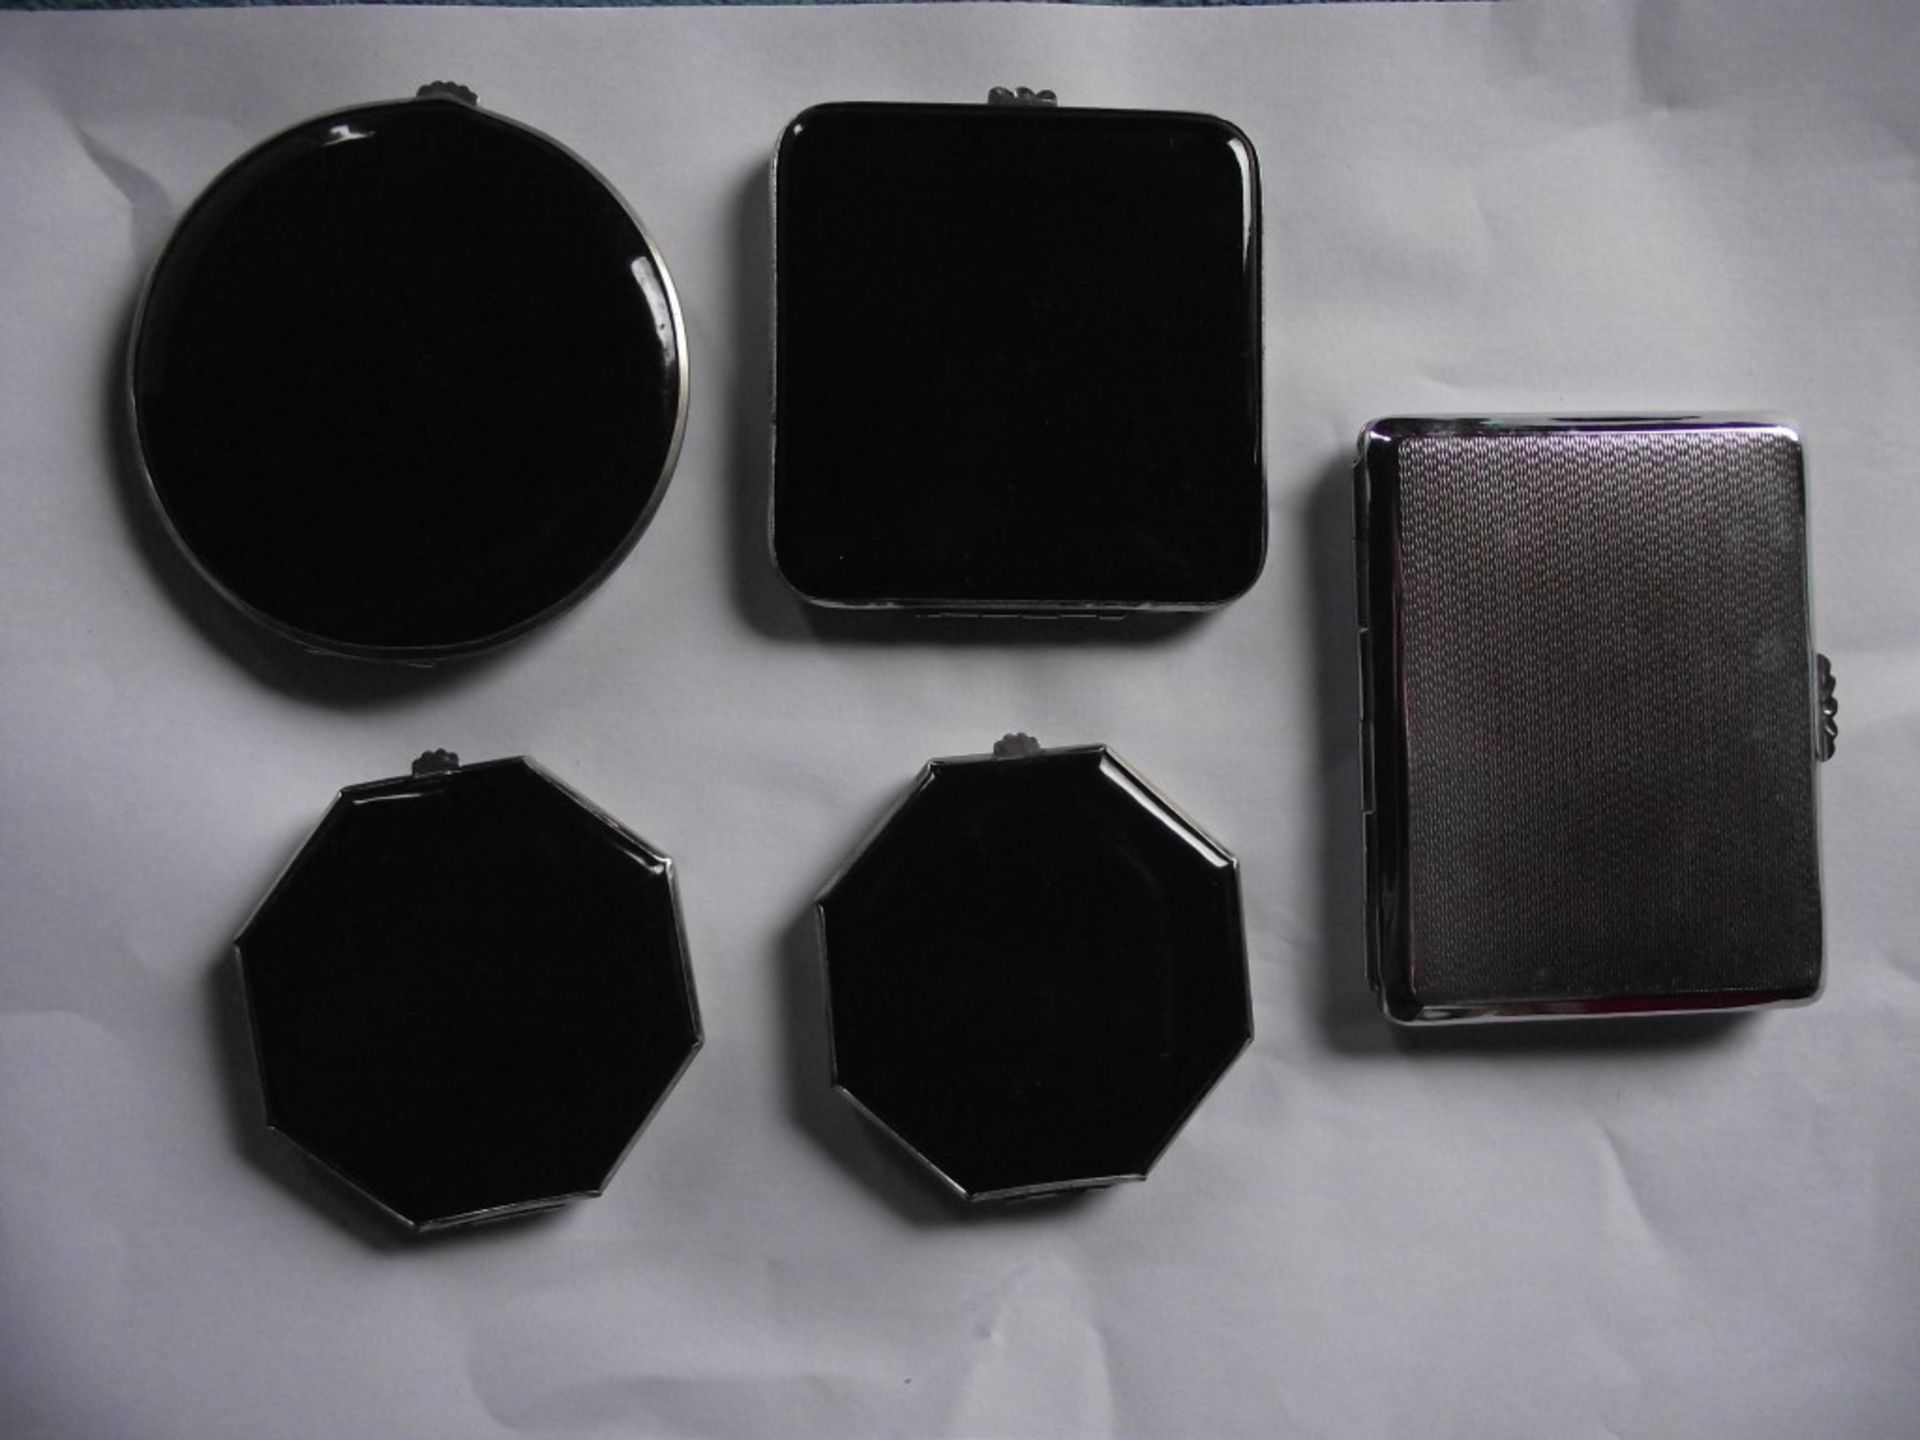 5 X 1930's Gwenda Powder Compacts & Cigarette Case - New Old Stock (unused)- original boxes. - Image 11 of 16